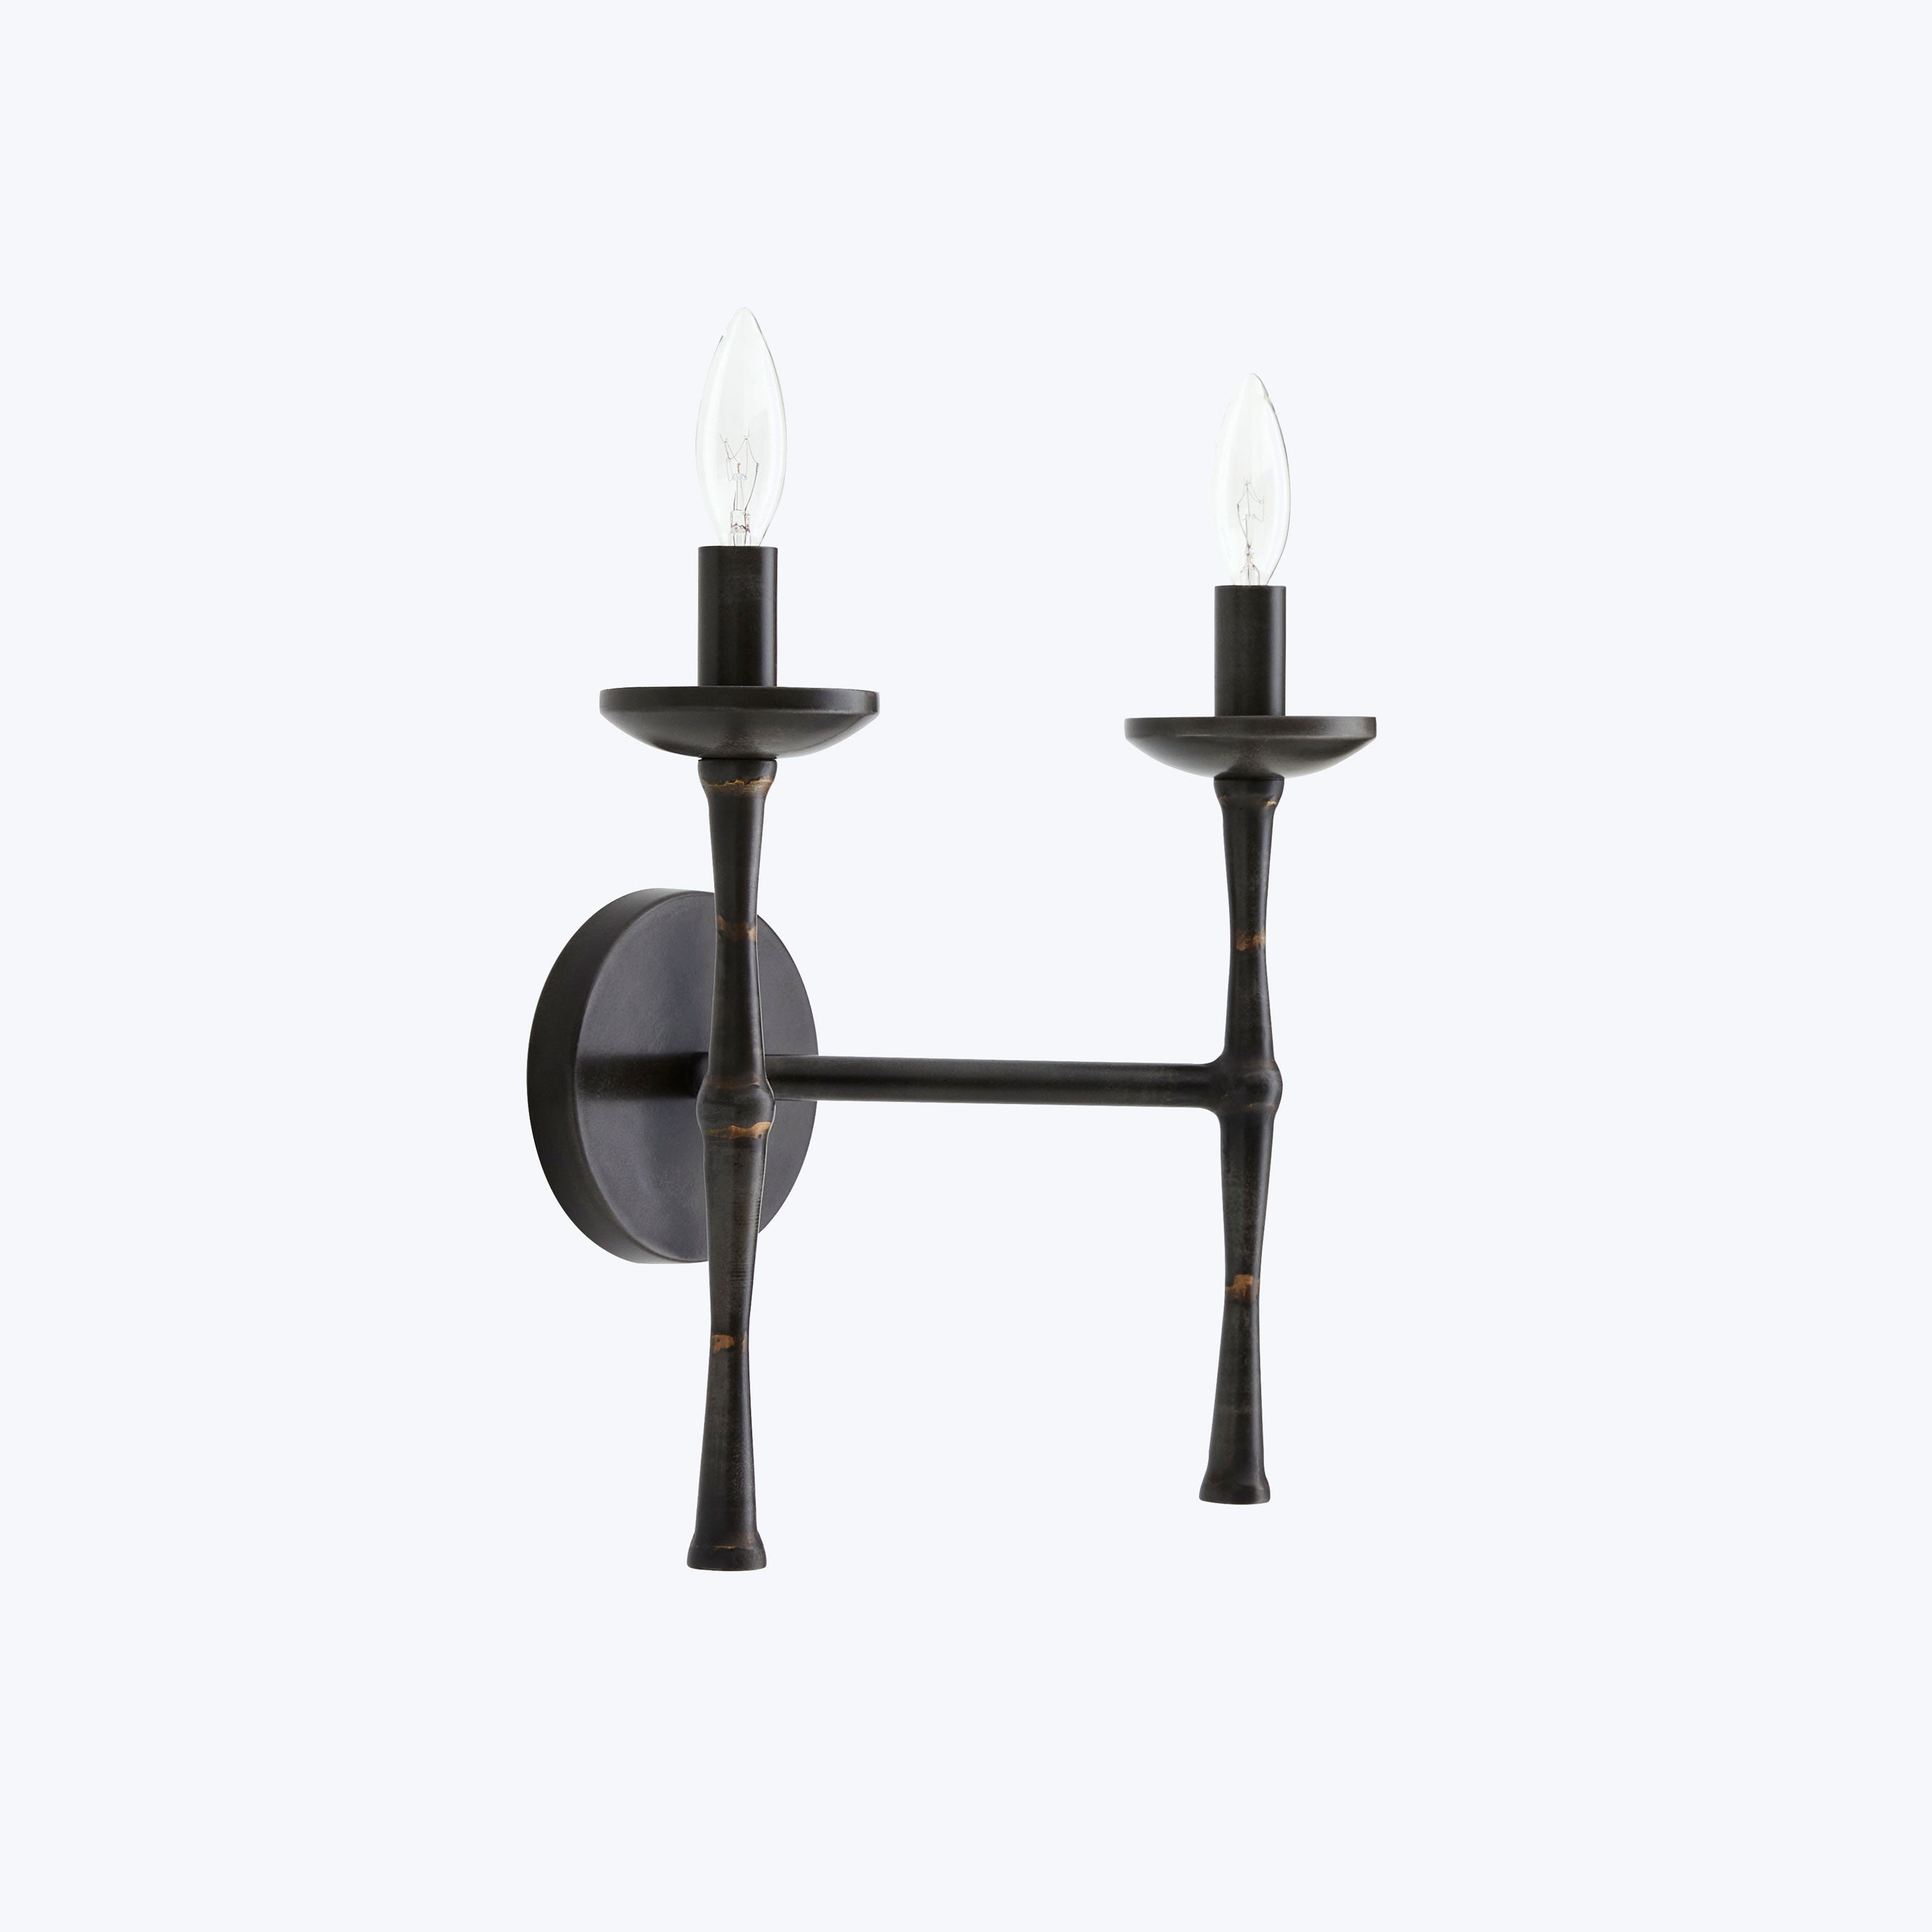 Vintage-inspired electric sconce adds a decorative touch to any space.